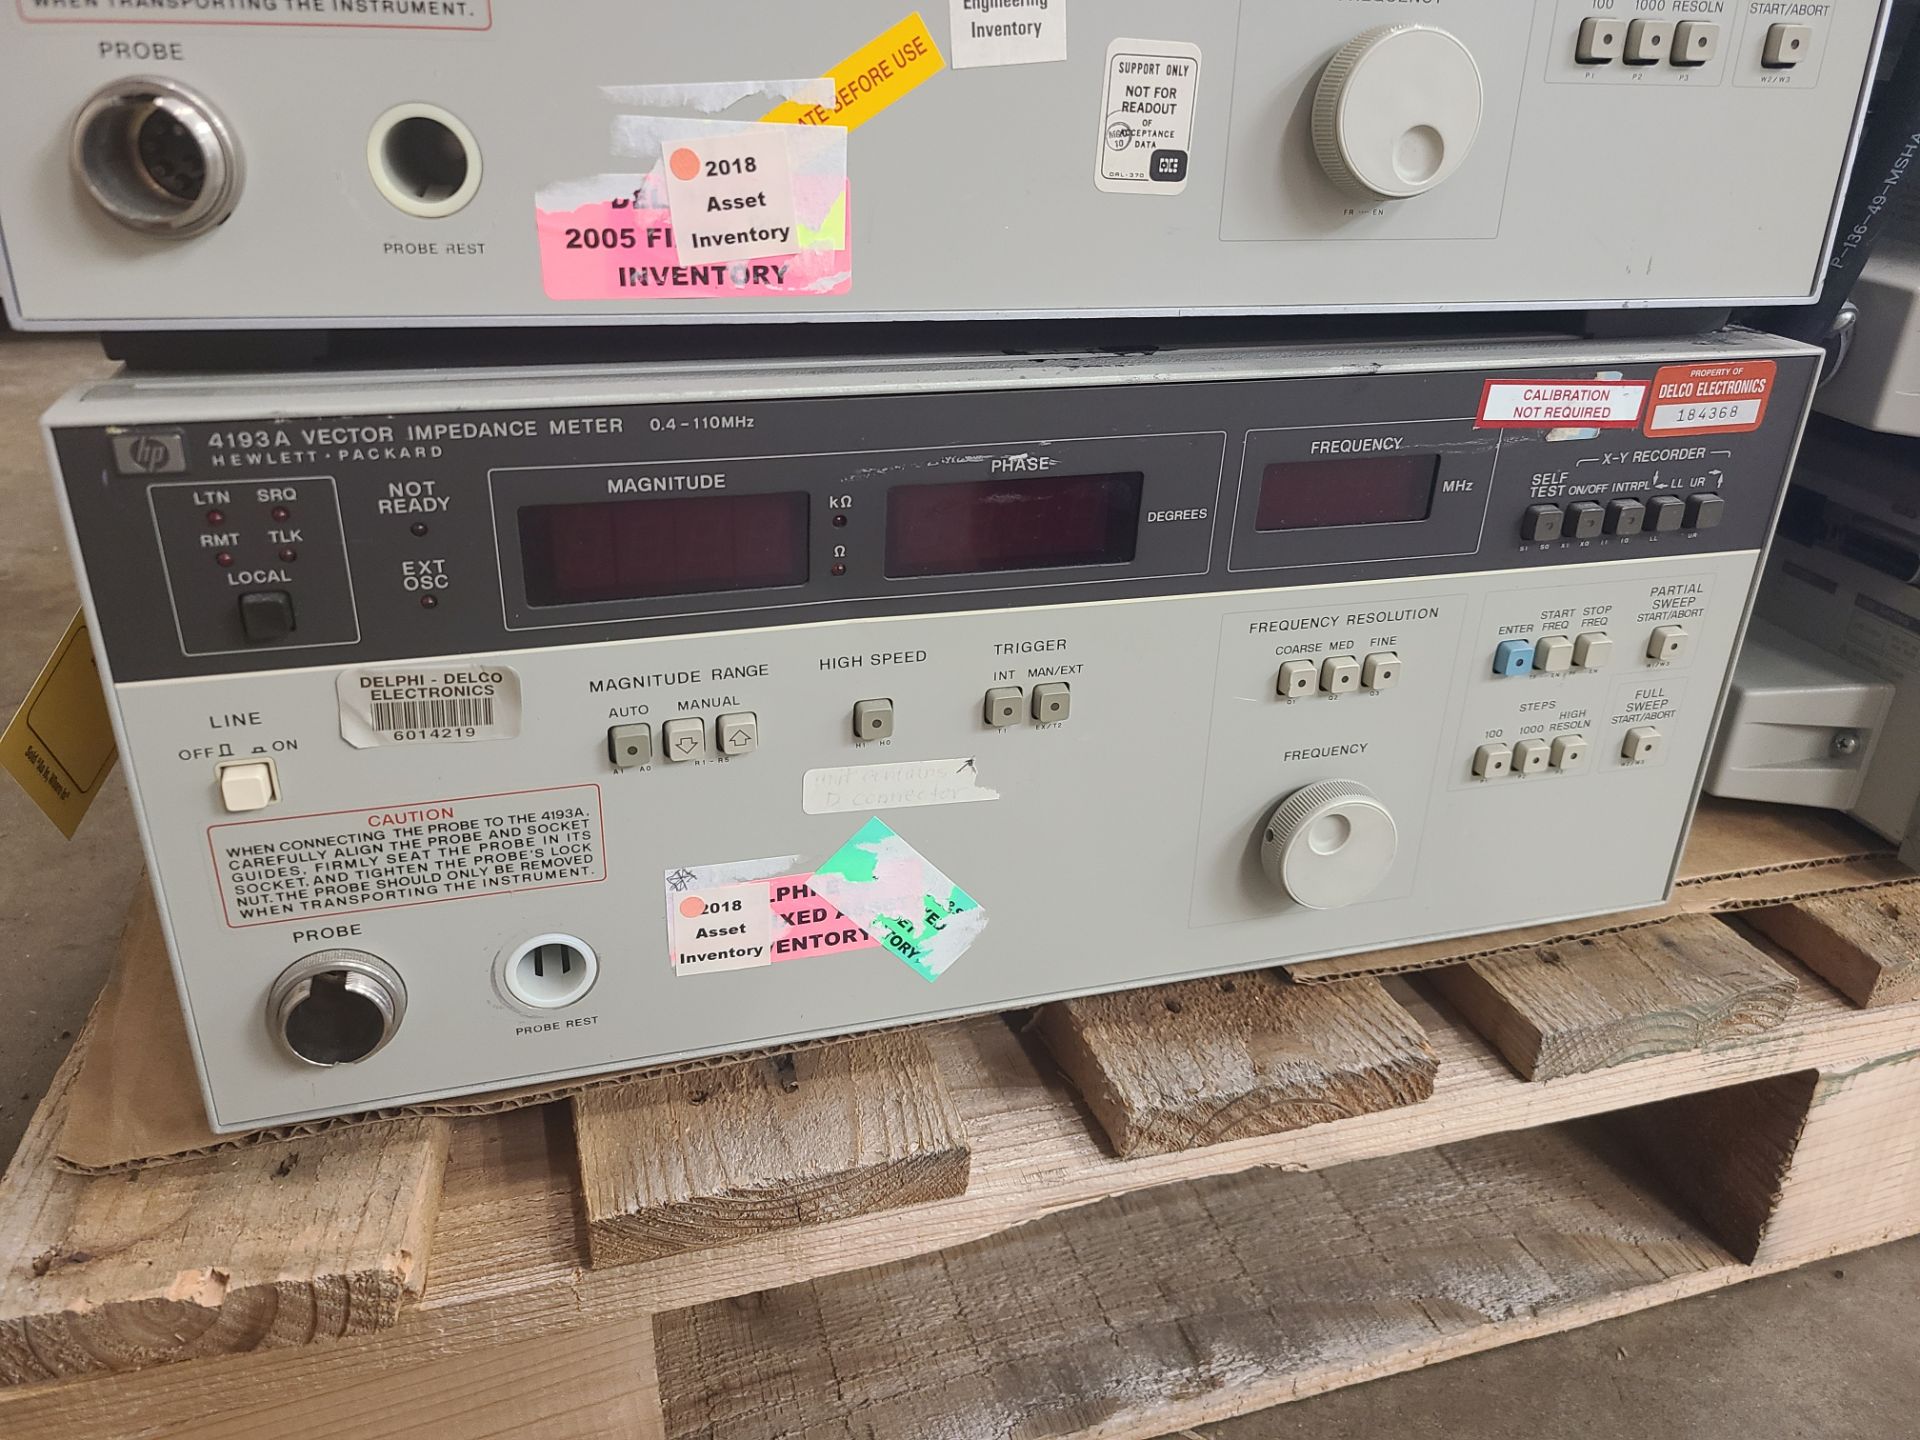 HP 4193A VECTOR IMPEDANCE METER